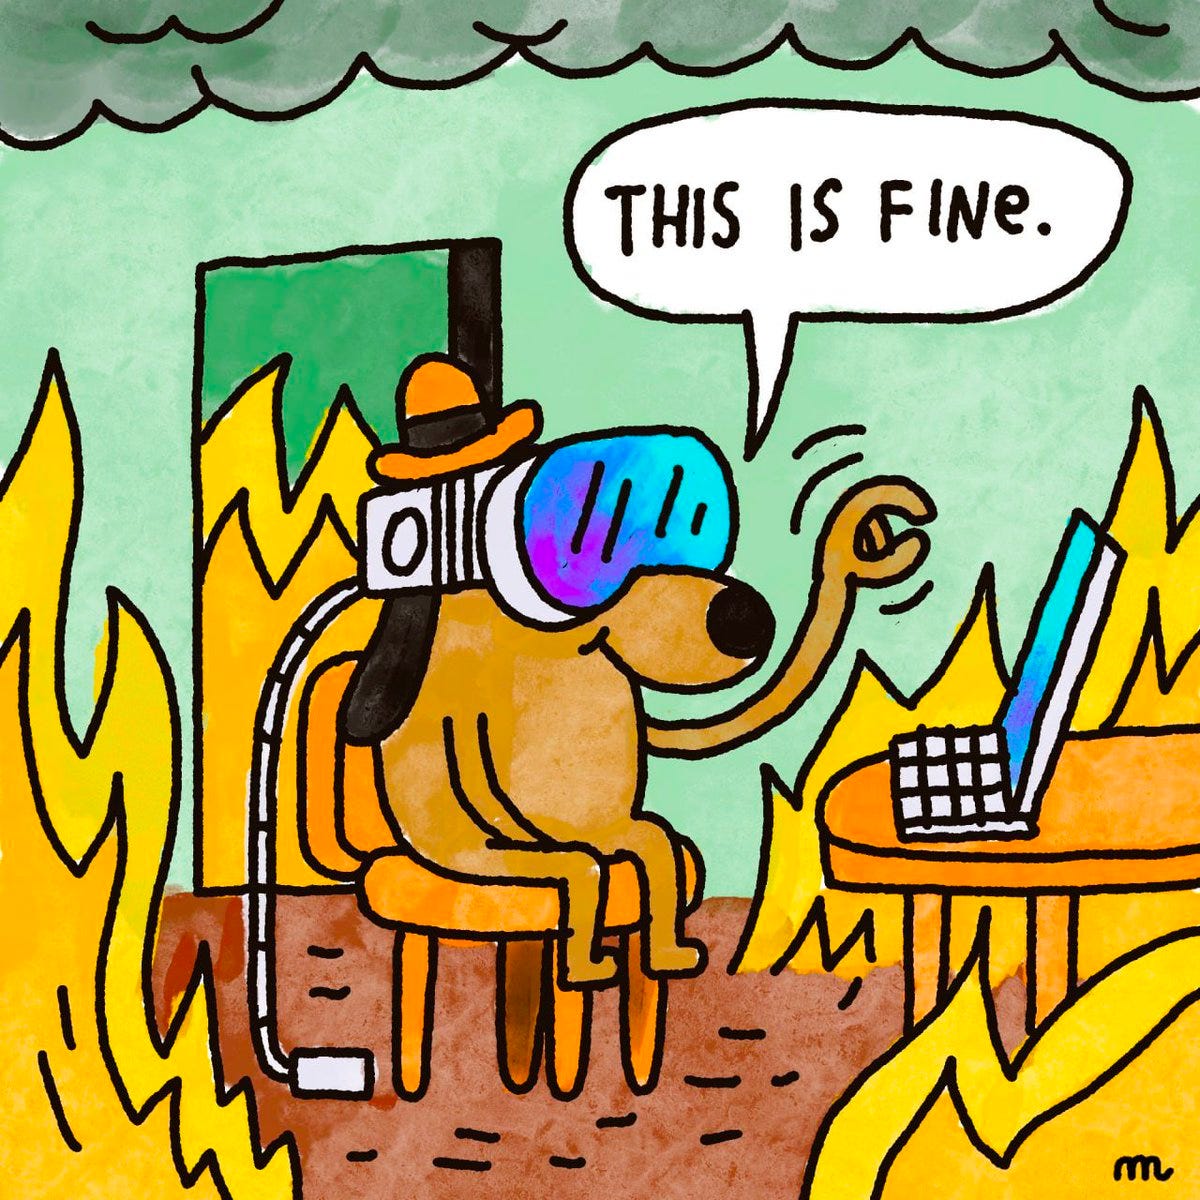 this is fine dog meme the dog sitting in the burning room wearing an apple vision pro arm up in the air for an unseen task, oblivious to his situation, the speech bubble says this is fine (found on social media)